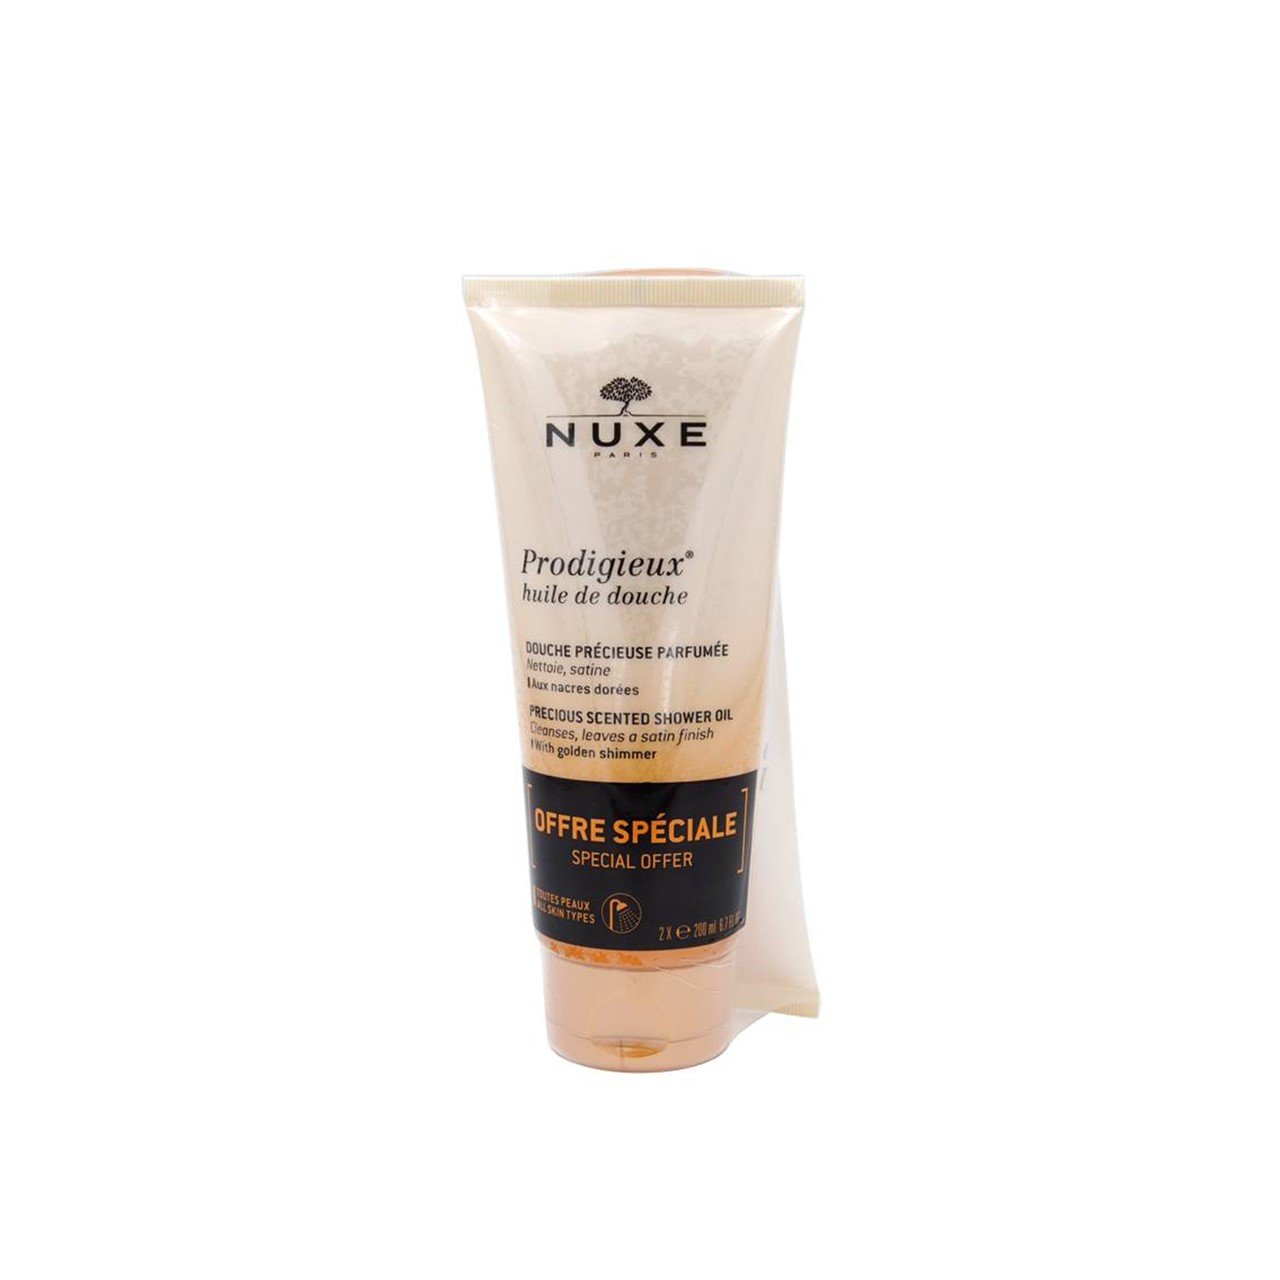 NUXE Prodigieux Shower Oil With Golden Shimmer 200ml x2